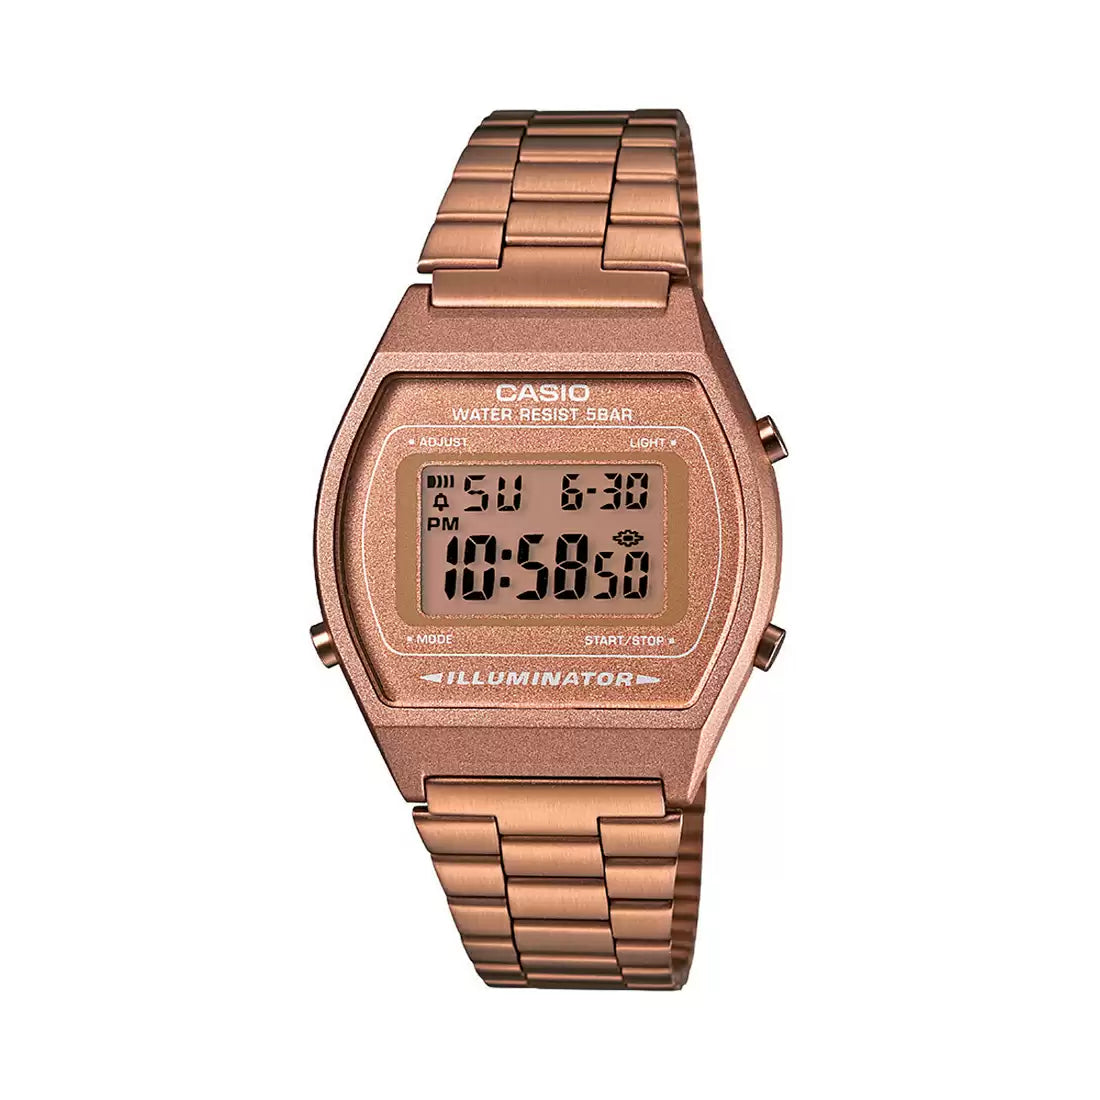 CASIO VINTAGE COLLECTION B640WC-5ADF - D128